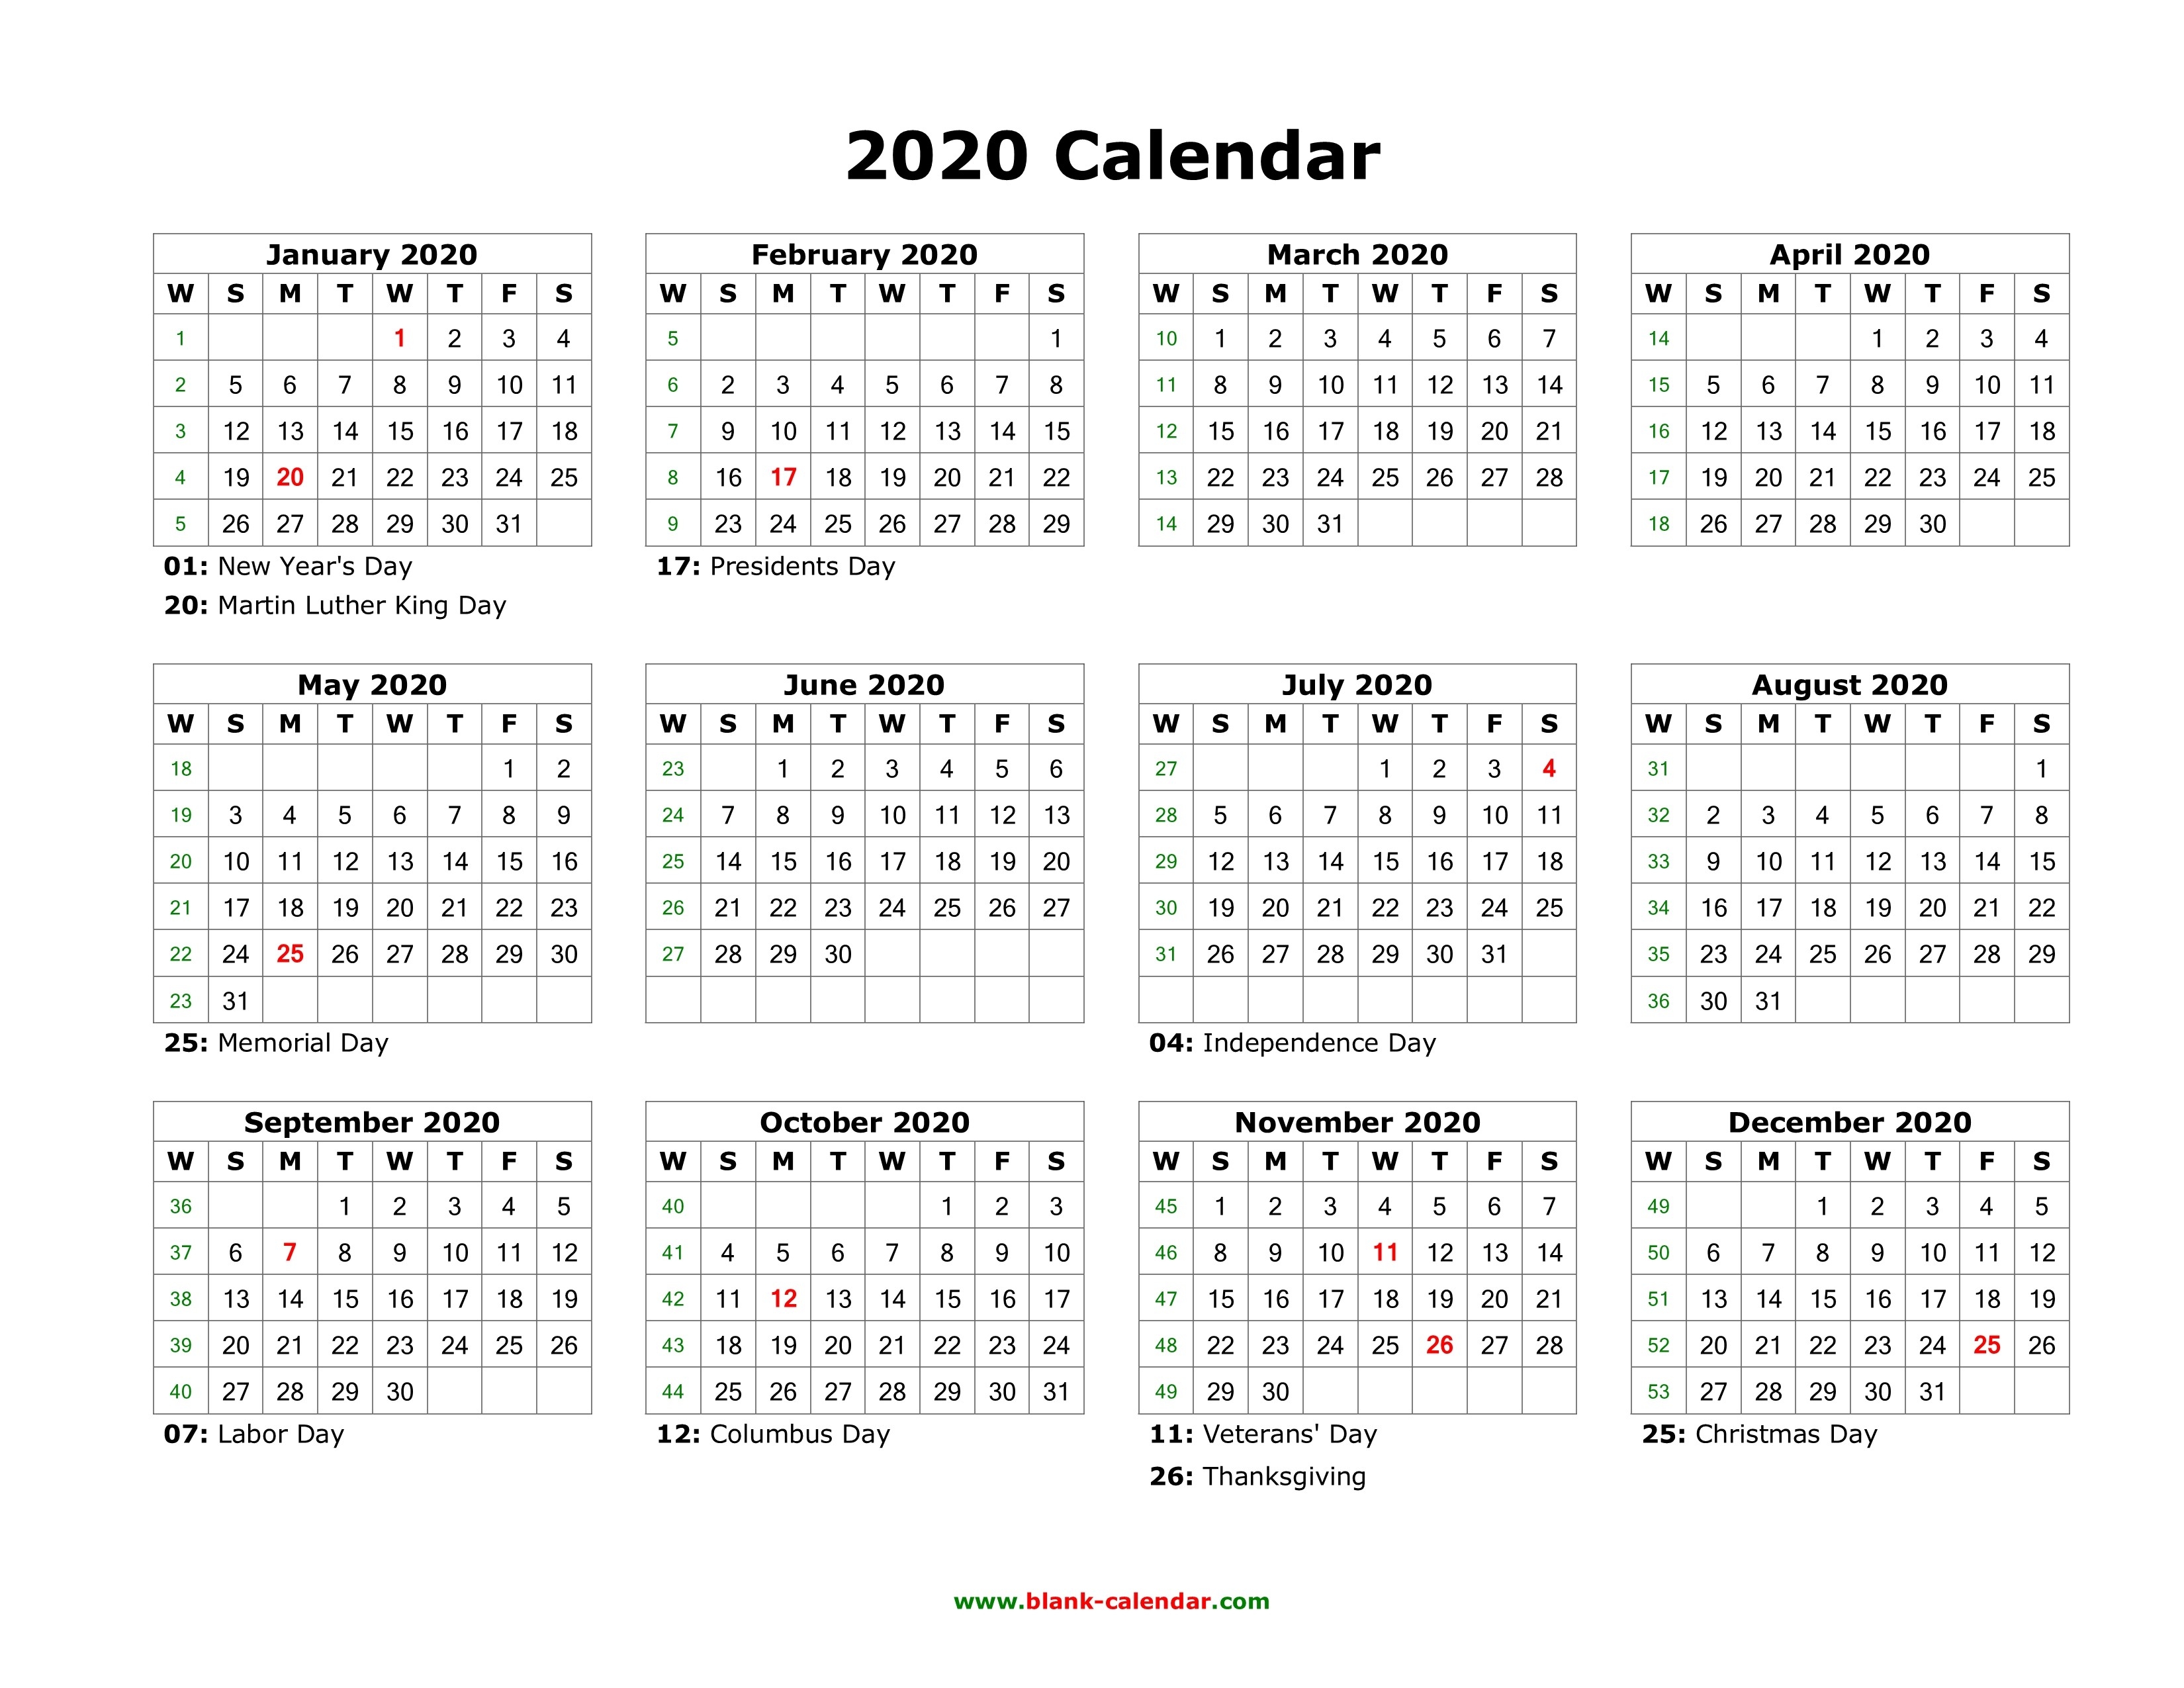 Download Blank Calendar 2020 With Us Holidays (12 Months On-2020 Calendar Photo Holidays